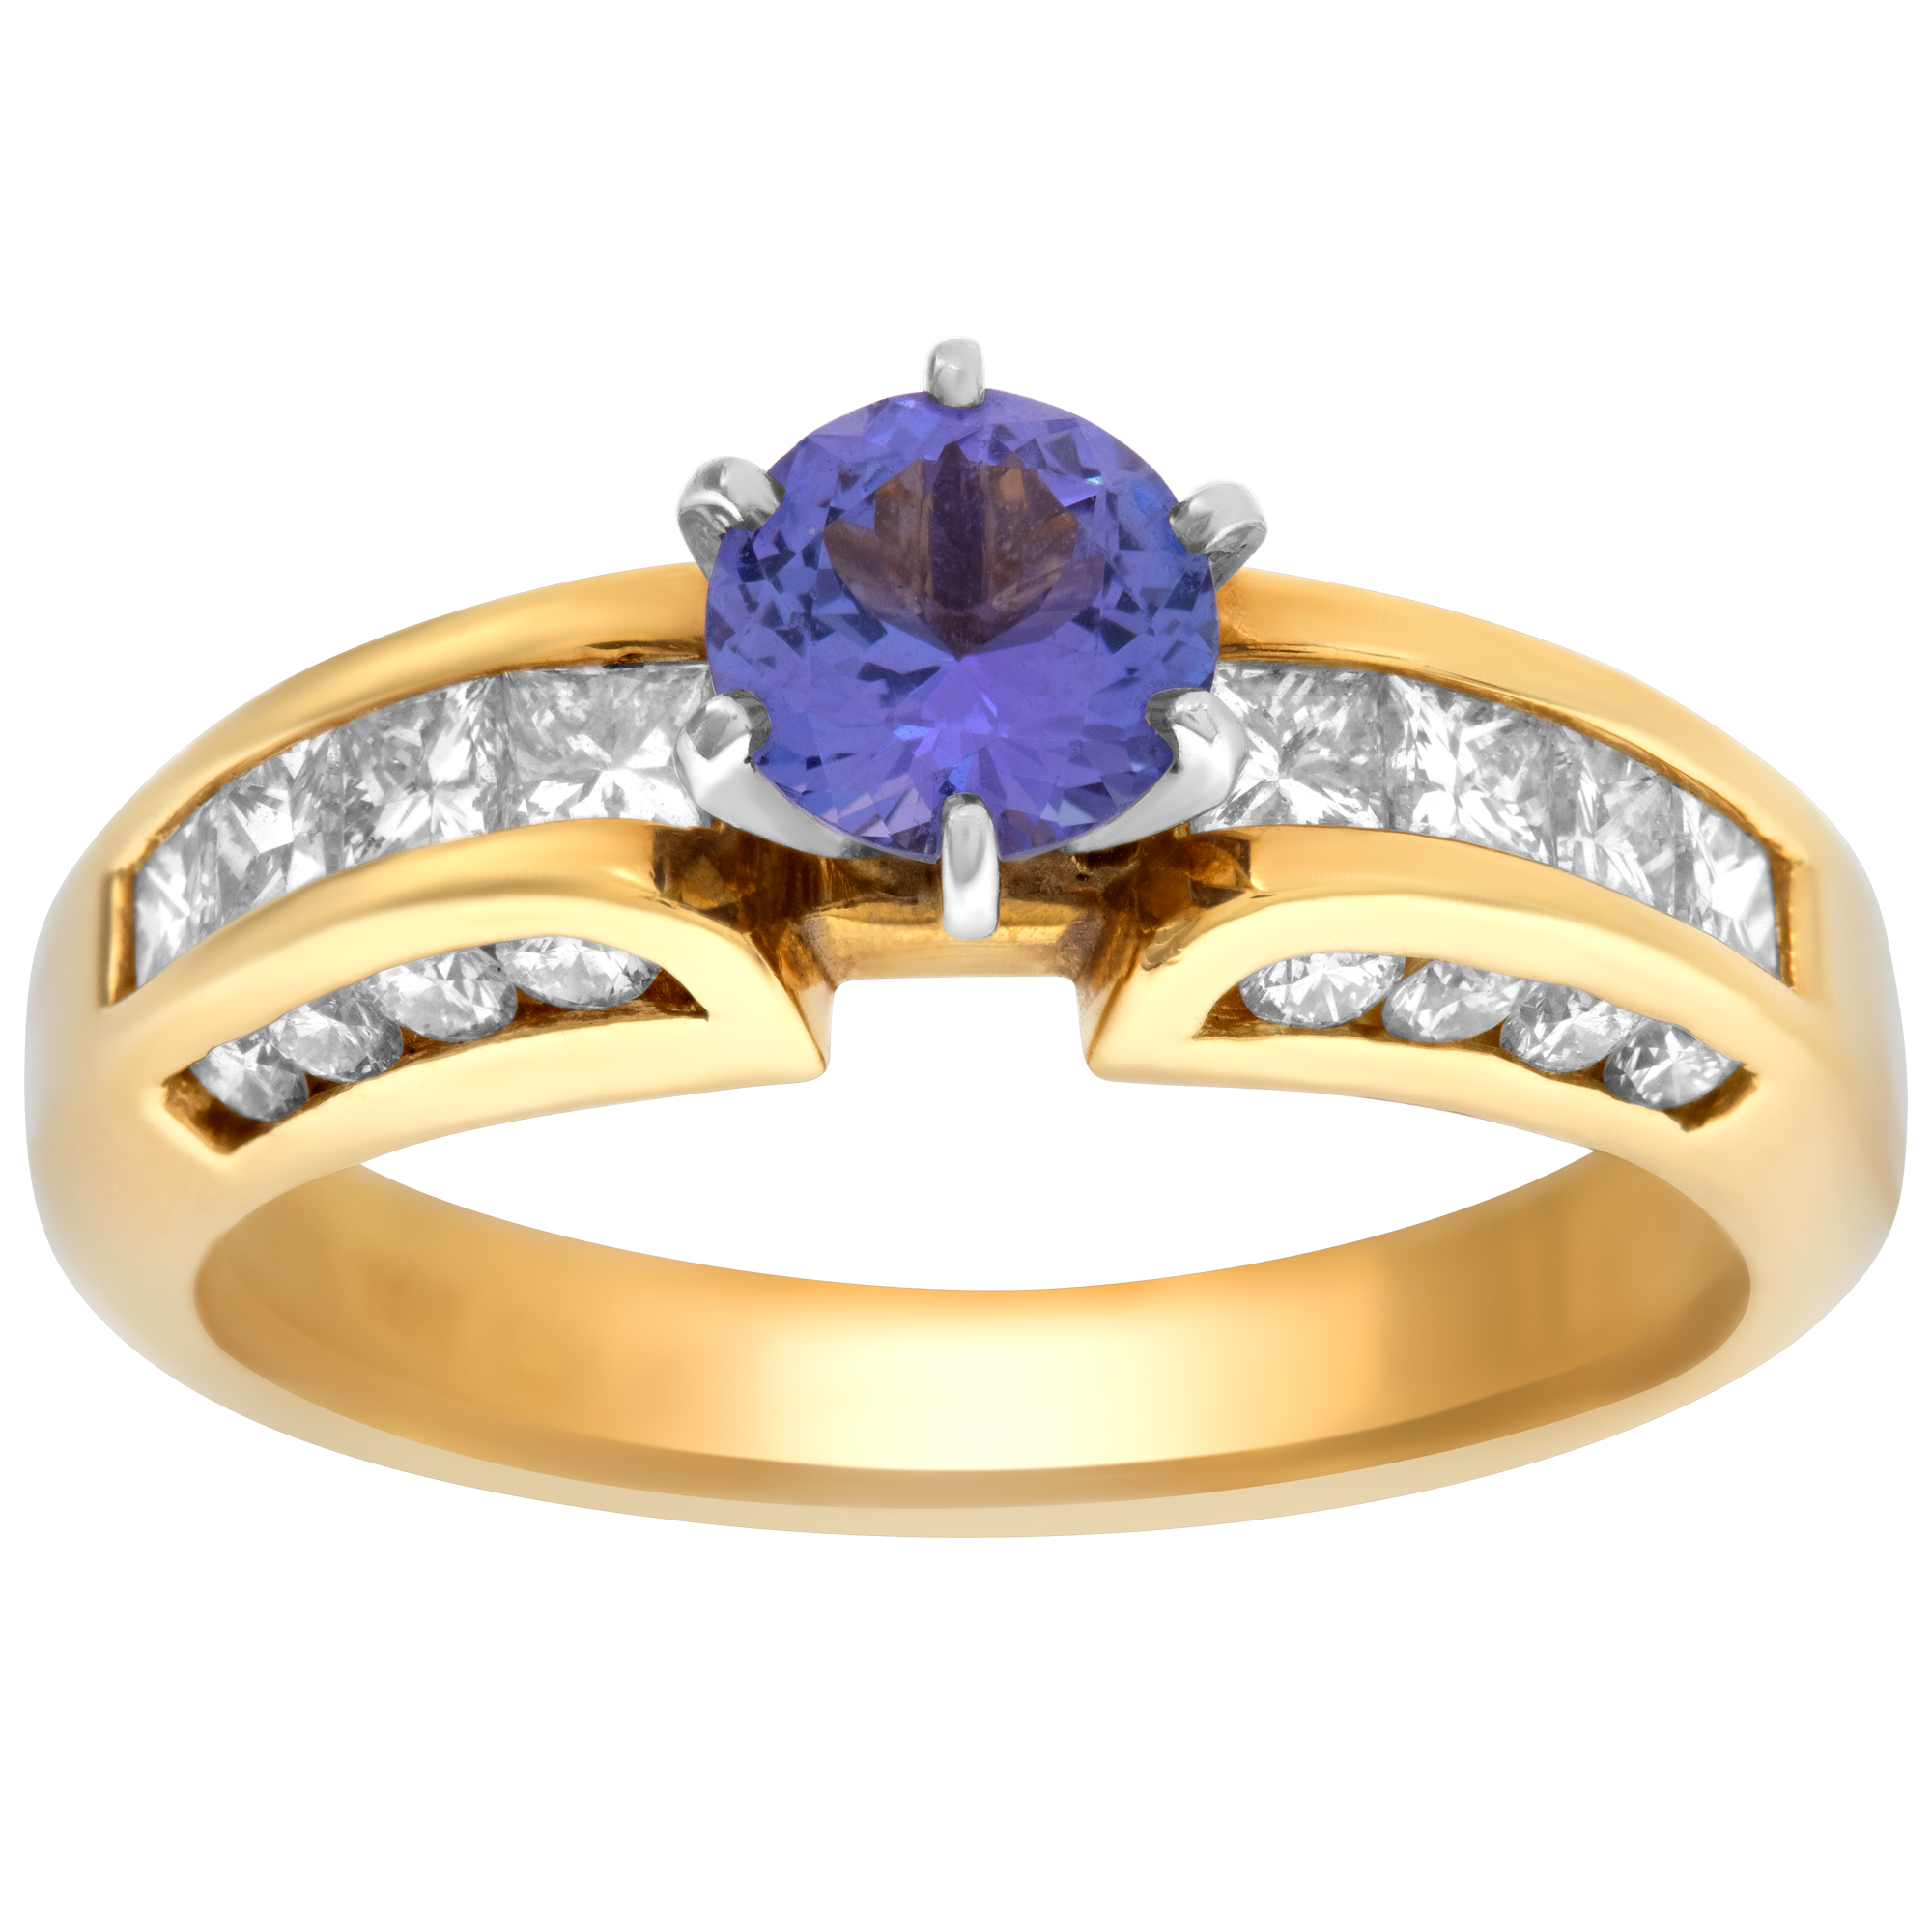 Tanzanite ring with 0.75cts of diamonds accenting top & sides of band. Size 8.25.